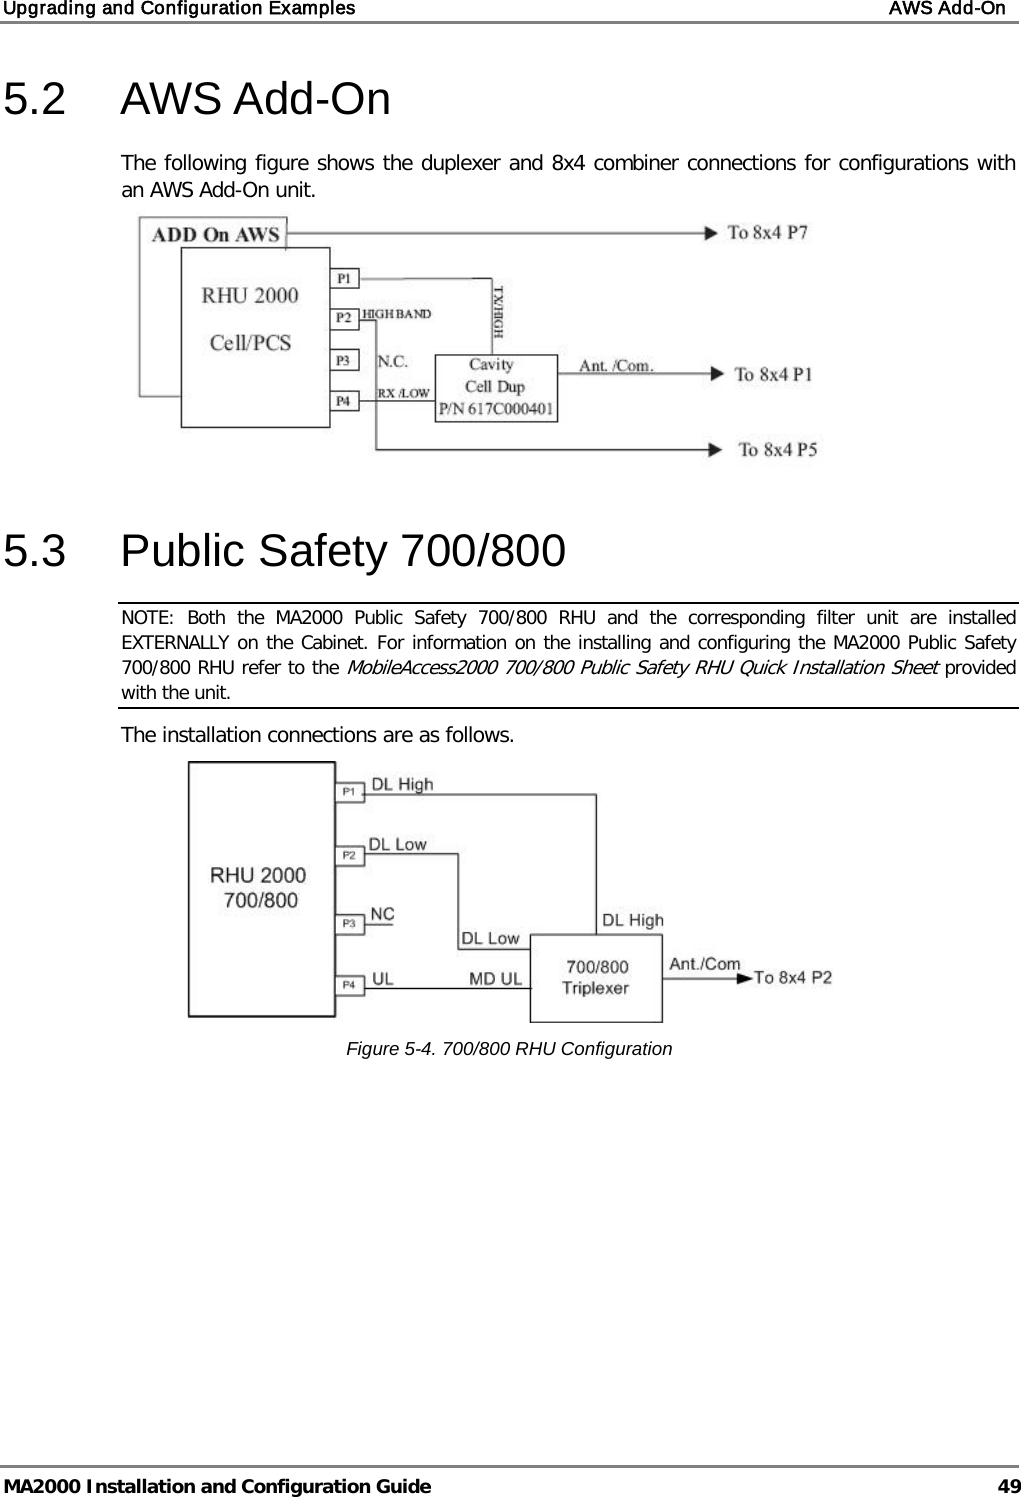 Upgrading and Configuration Examples    AWS Add-On   MA2000 Installation and Configuration Guide  49 5.2  AWS Add-On The following figure shows the duplexer and 8x4 combiner connections for configurations with an AWS Add-On unit.  5.3  Public Safety 700/800 NOTE:  Both the MA2000 Public Safety 700/800 RHU and the corresponding filter unit are installed EXTERNALLY on the Cabinet. For information on the installing and configuring the MA2000 Public Safety 700/800 RHU refer to the MobileAccess2000 700/800 Public Safety RHU Quick Installation Sheet provided with the unit. The installation connections are as follows.  Figure  5-4. 700/800 RHU Configuration    